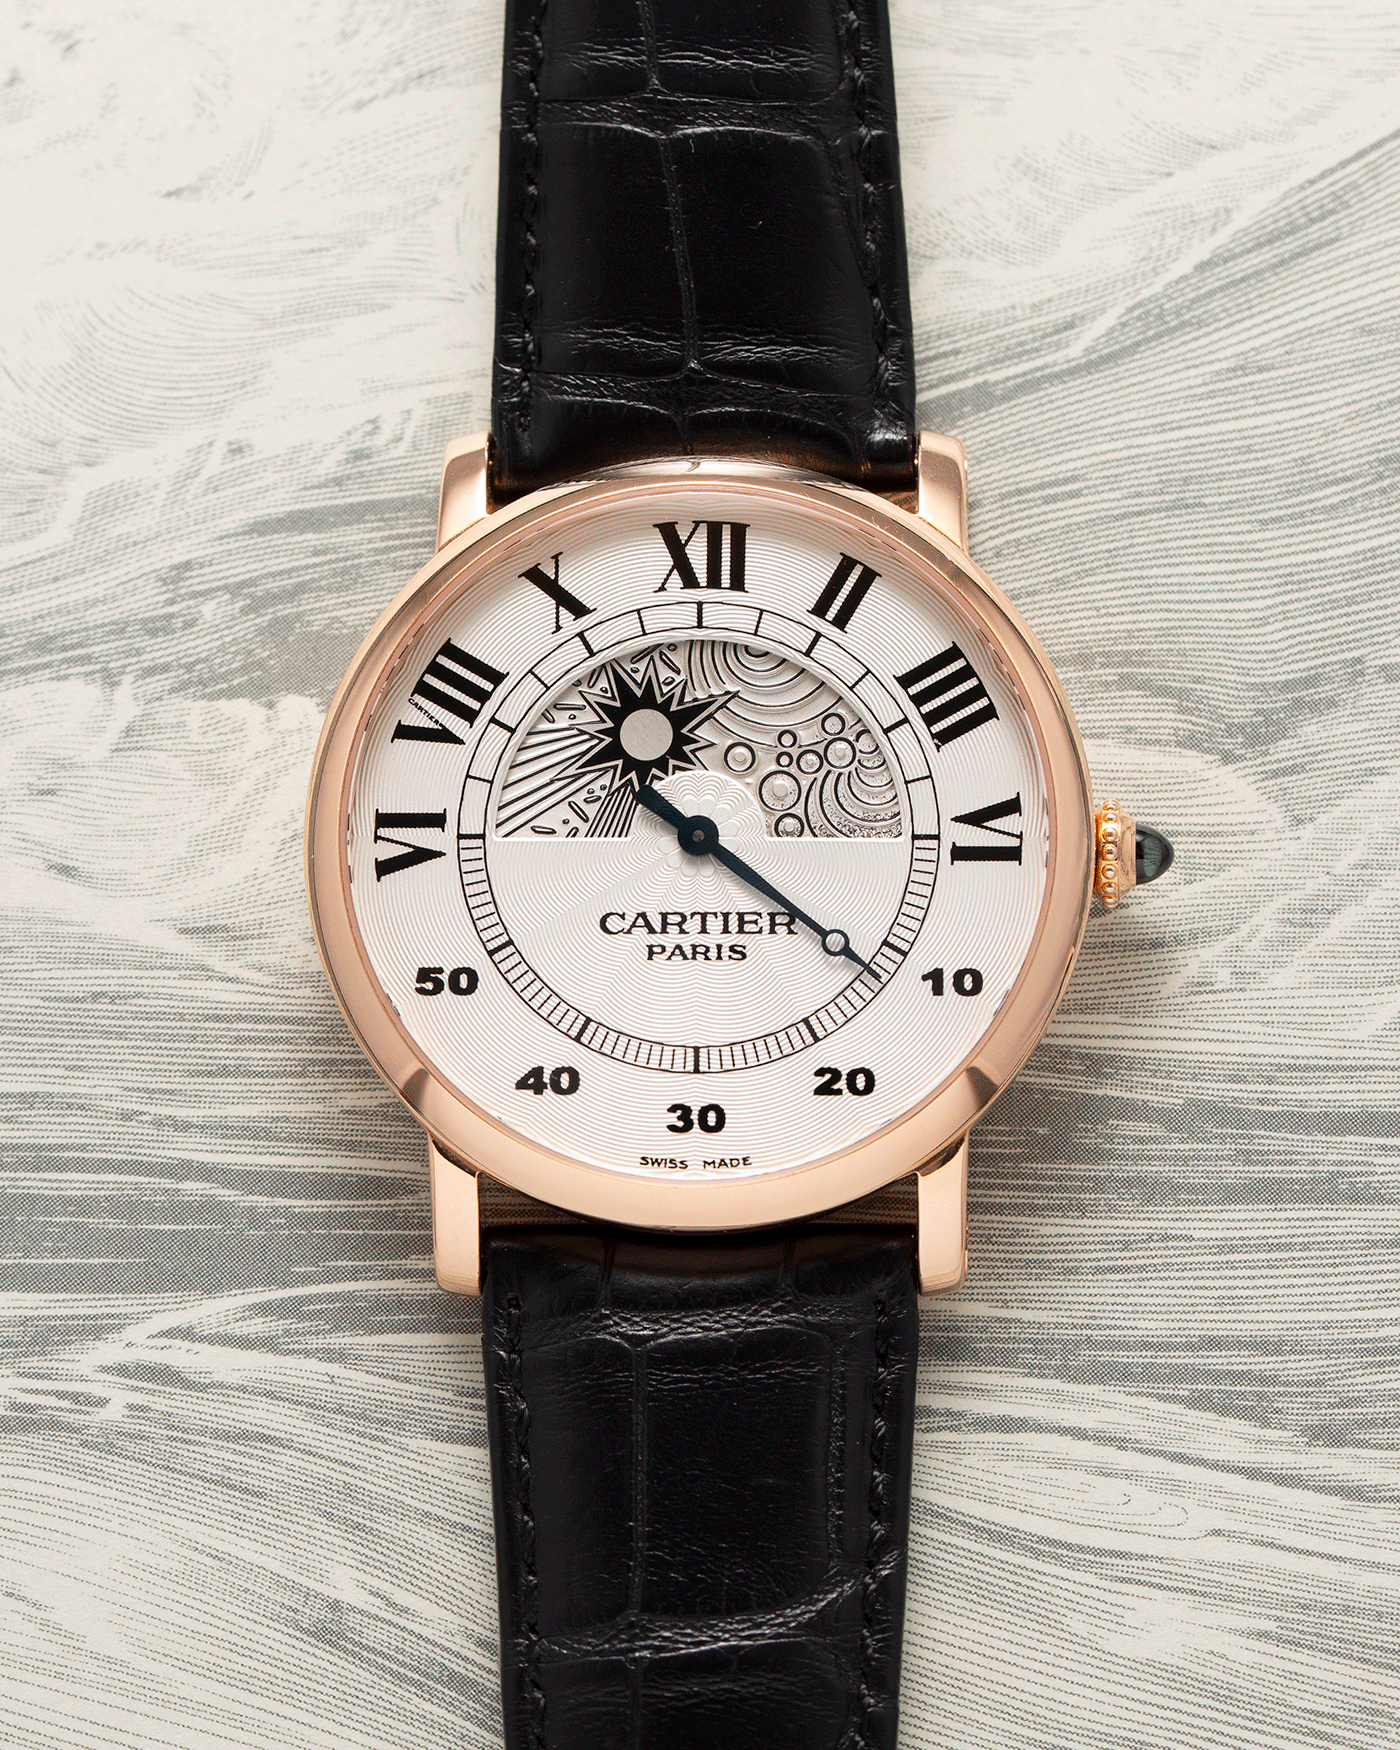 Brand: Cartier Year: 2000’s Model: CPCP Rotonde Jour Et Nuit Reference: 28721 Material: 18k Rose Gold Movement: Cal. 9903 MC Case Diameter: 42mm Strap: Black Cartier Alligator Strap with 18k Rose Gold DeployantBrand: Cartier Year: 2000’s Model: CPCP Rotonde Jour Et Nuit Reference: 28721 Material: 18k Rose Gold Movement: Cal. 9903 MC Case Diameter: 42mm Strap: Black Cartier Alligator Strap with 18k Rose Gold Deployant